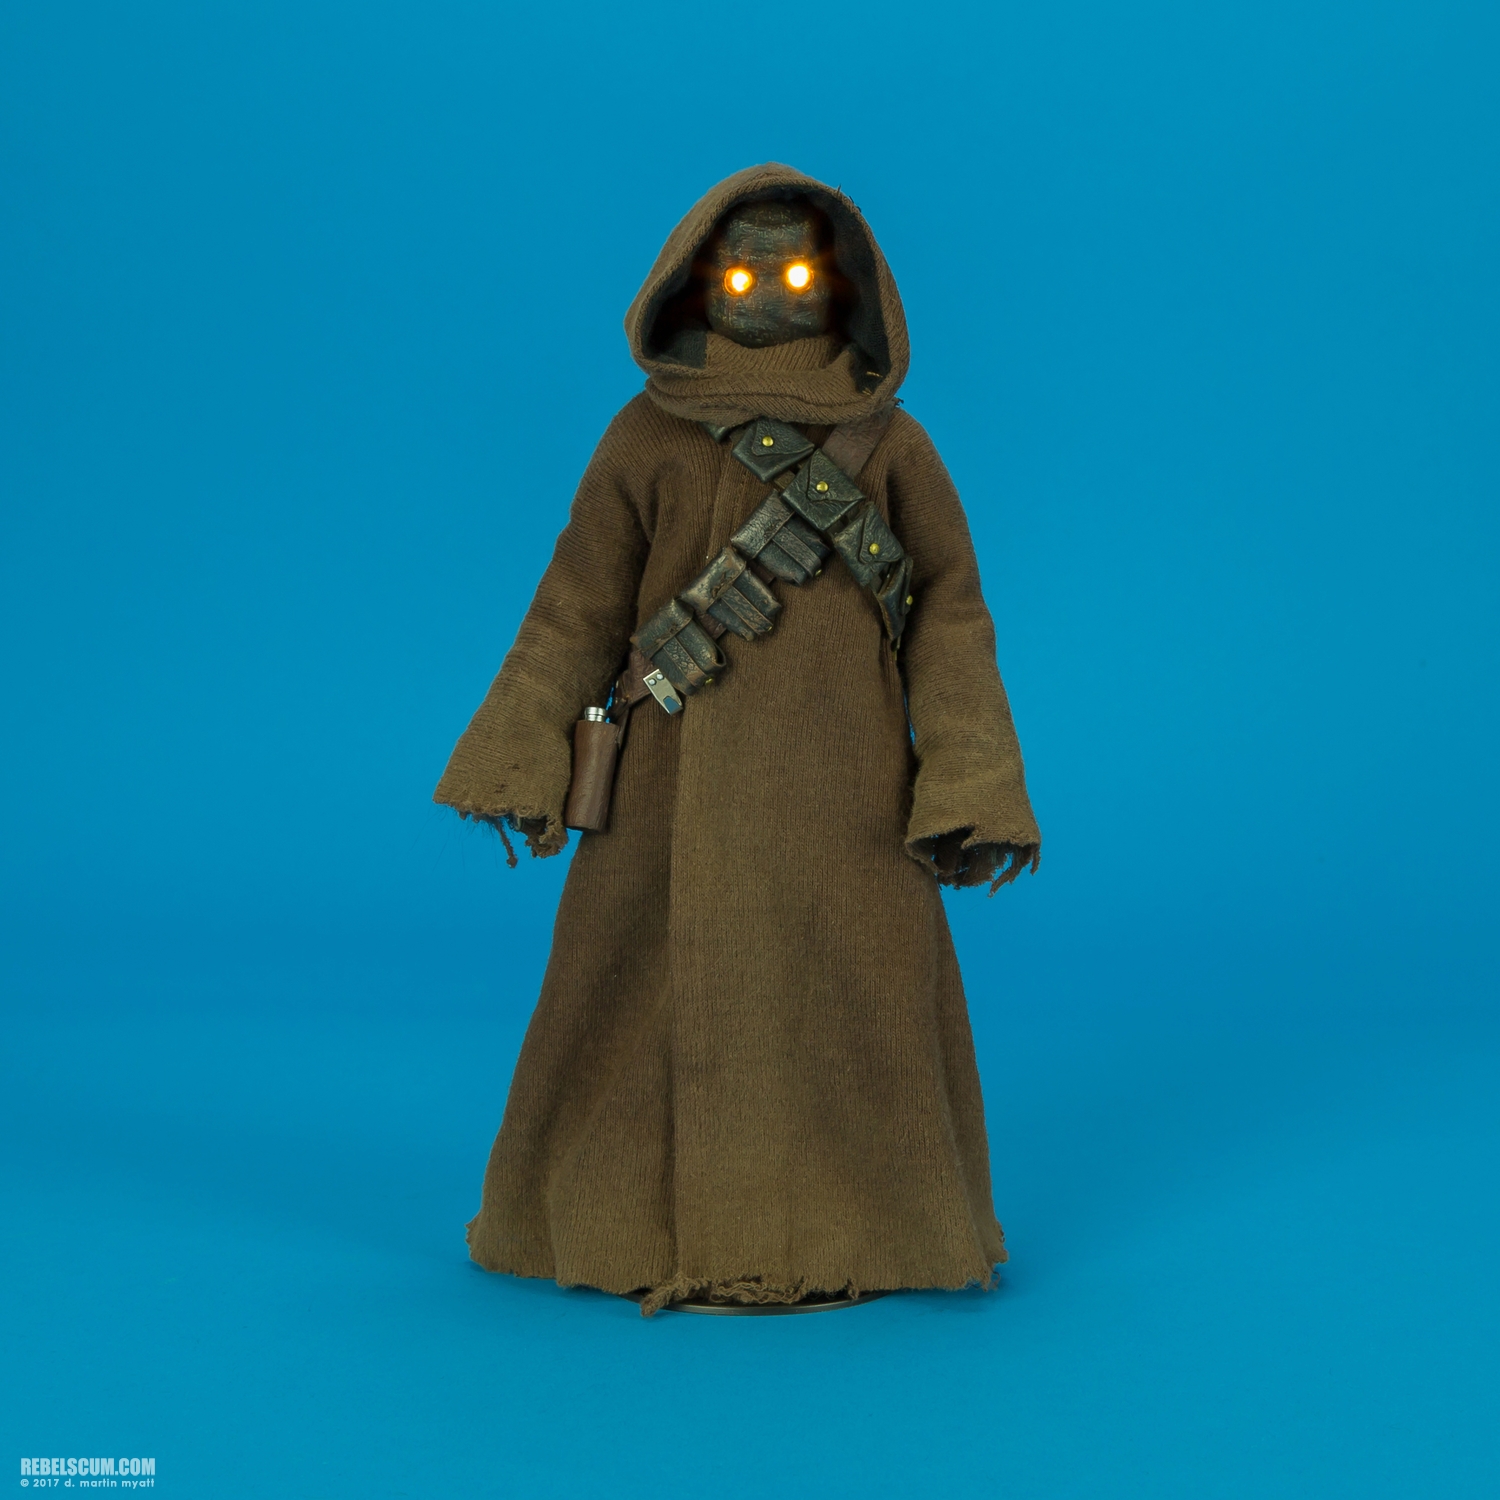 Jawa-Sixth-Scale-Figure-Two-Pack-Sideshow-Collectibles-001.jpg